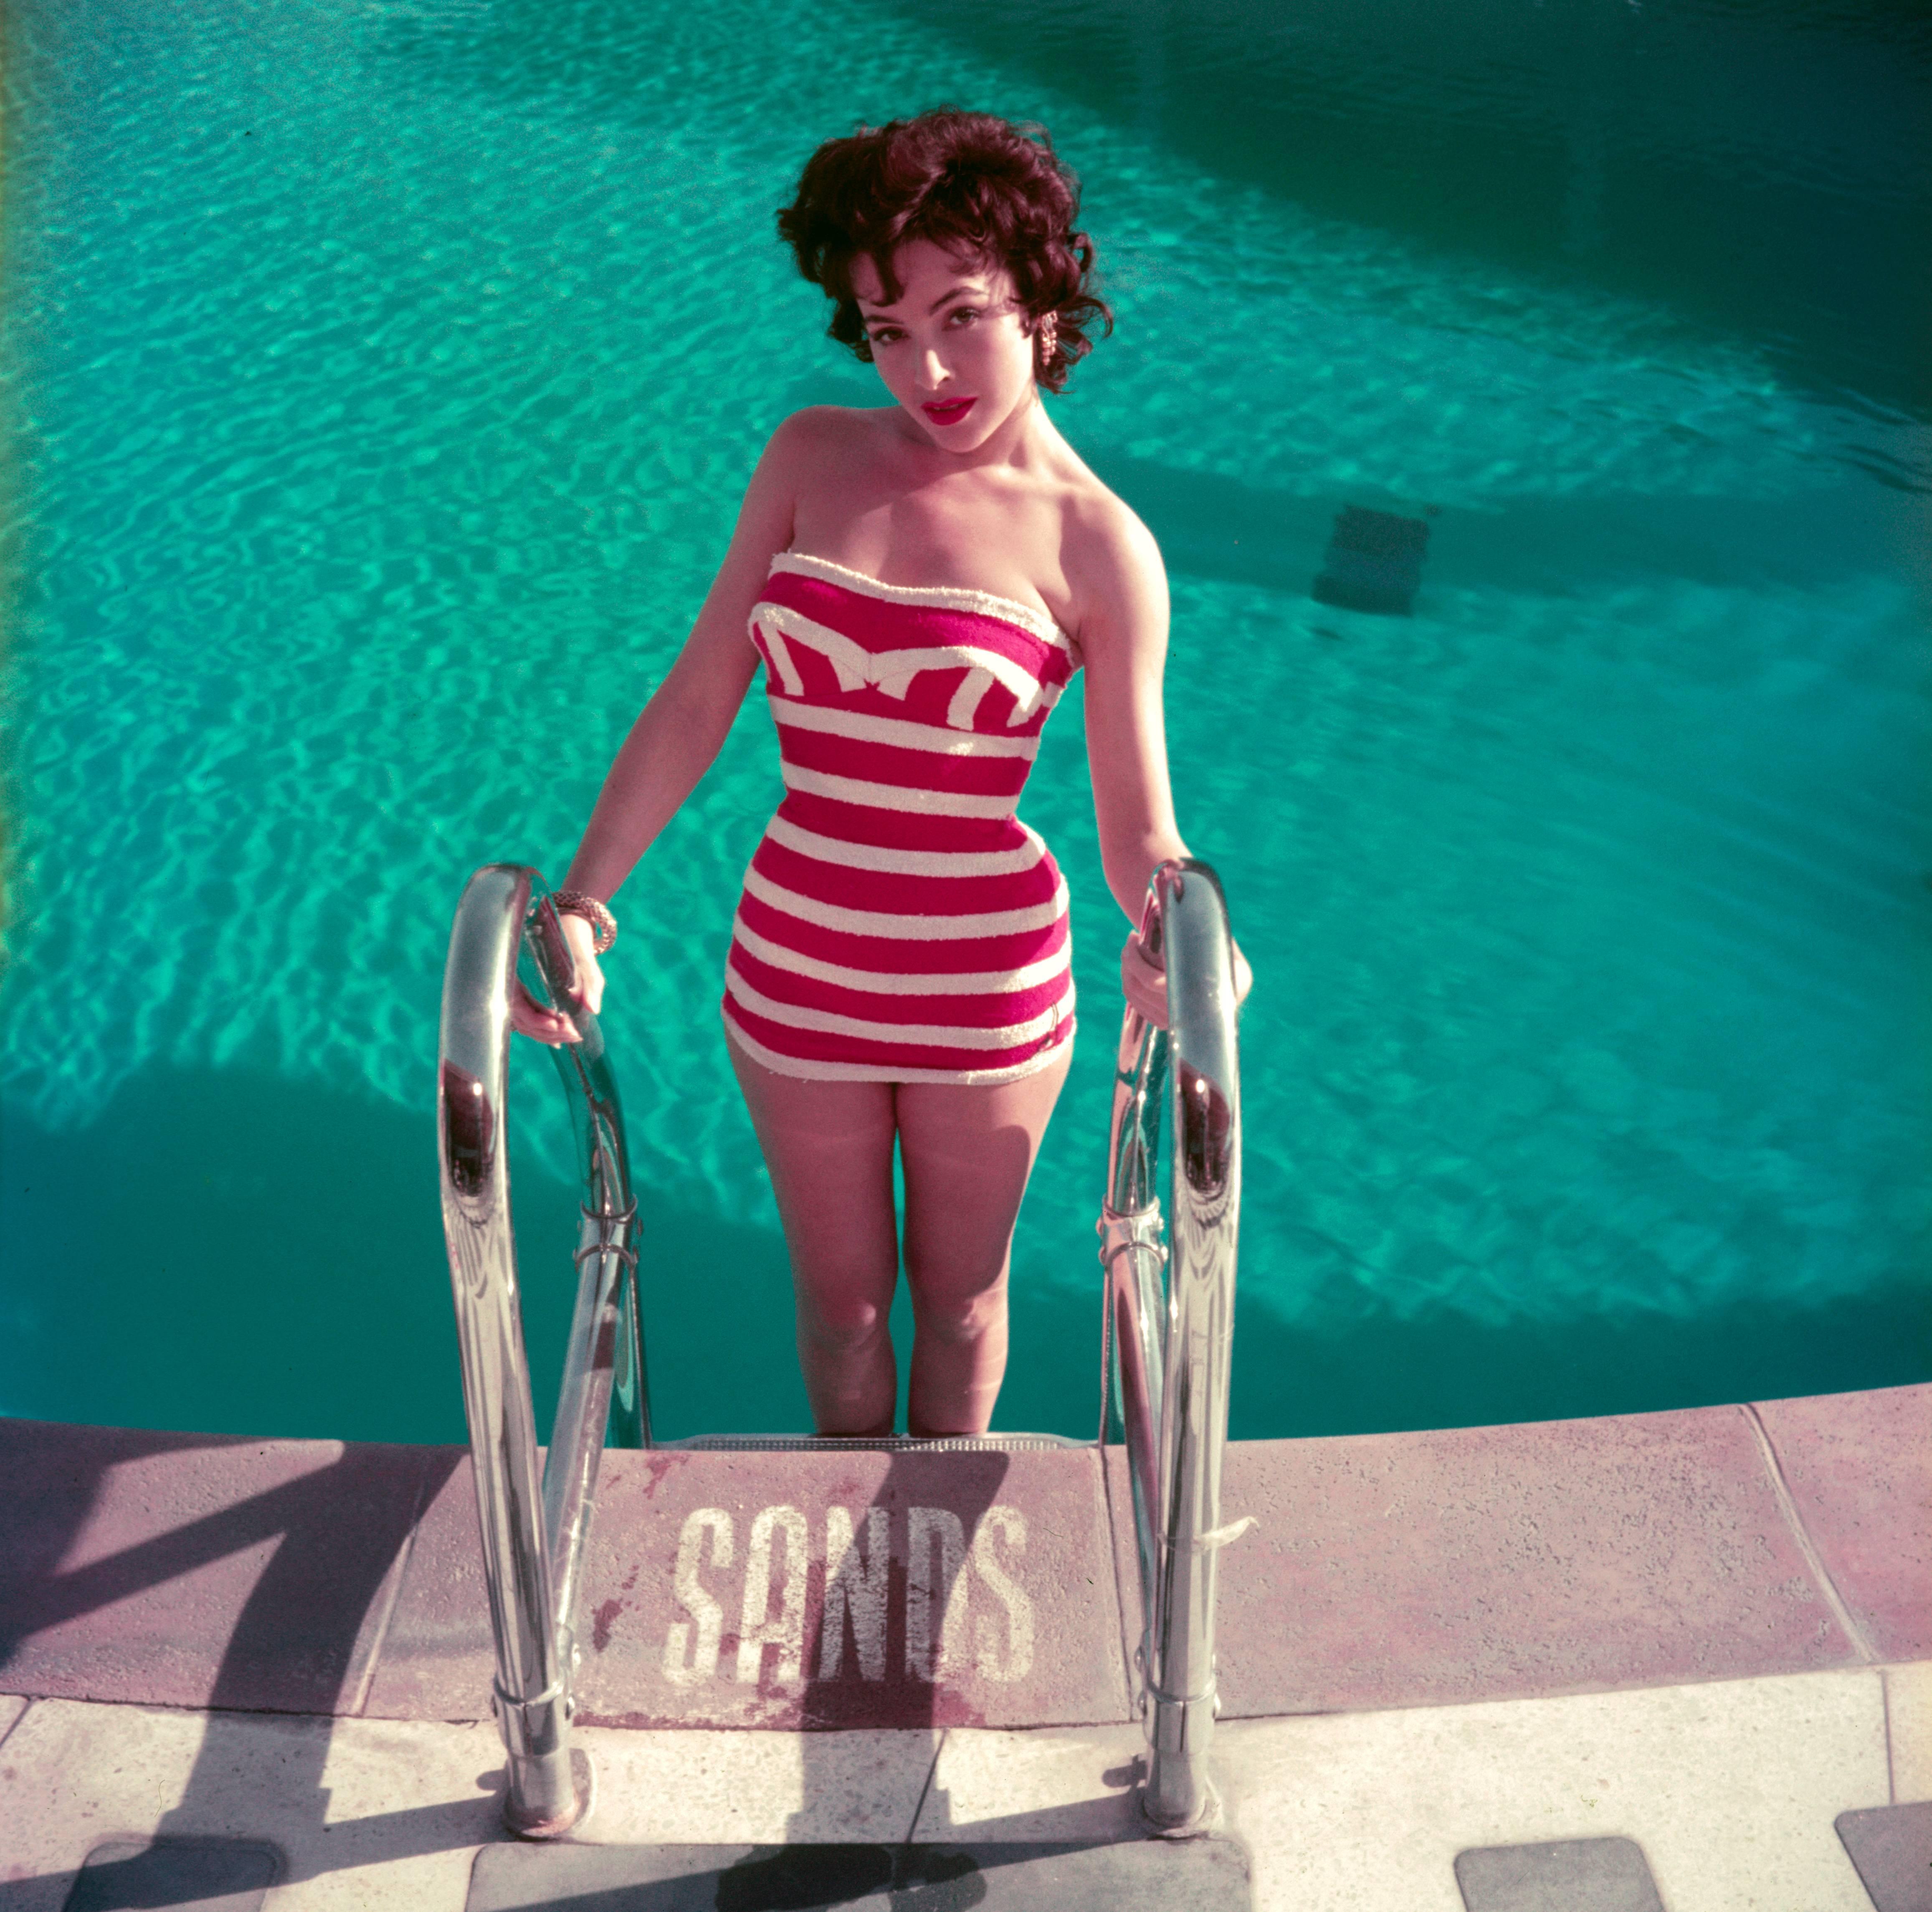 1954: Austrian actress Mara Lane posing by the pool at the Sands Hotel, Las Vegas, in a red and white striped bathing costume.

C-type print from the original transparency held at the Getty Images Archive, London.  Numbered and stamped by The Slim